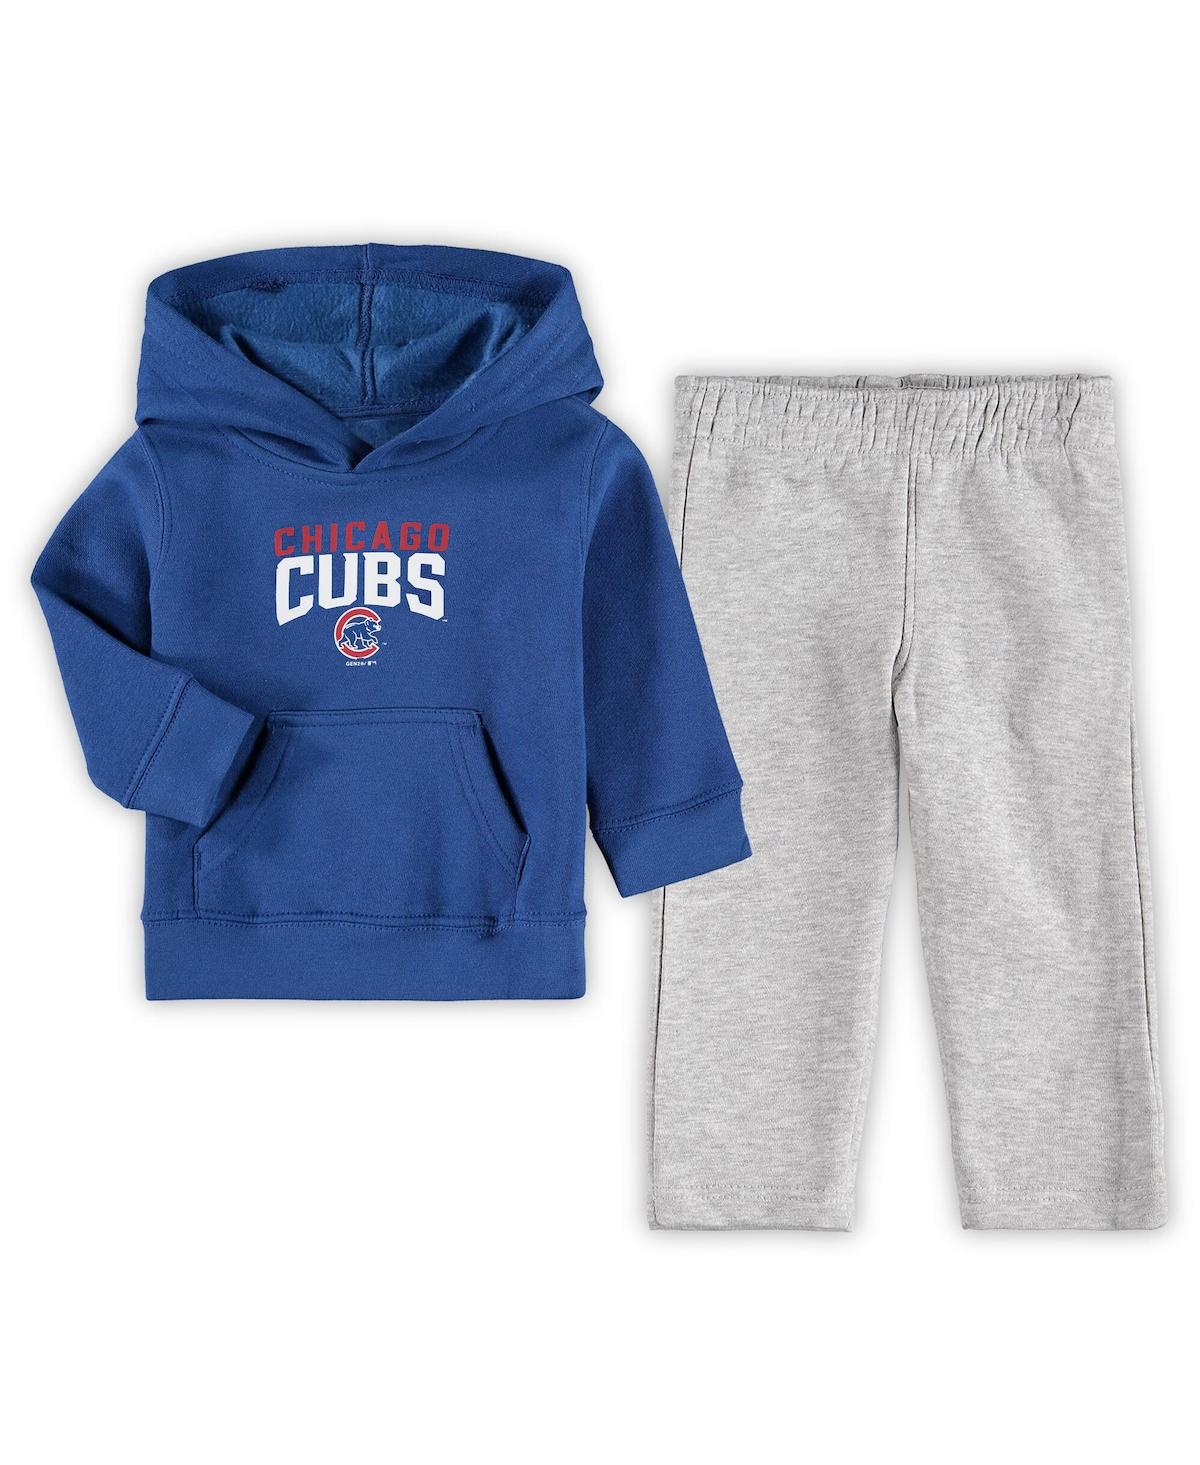 Outerstuff Babies' Infant Boys And Girls Royal, Heathered Gray Chicago Cubs Fan Flare Fleece Hoodie And Pants Set In Royal,heathered Gray